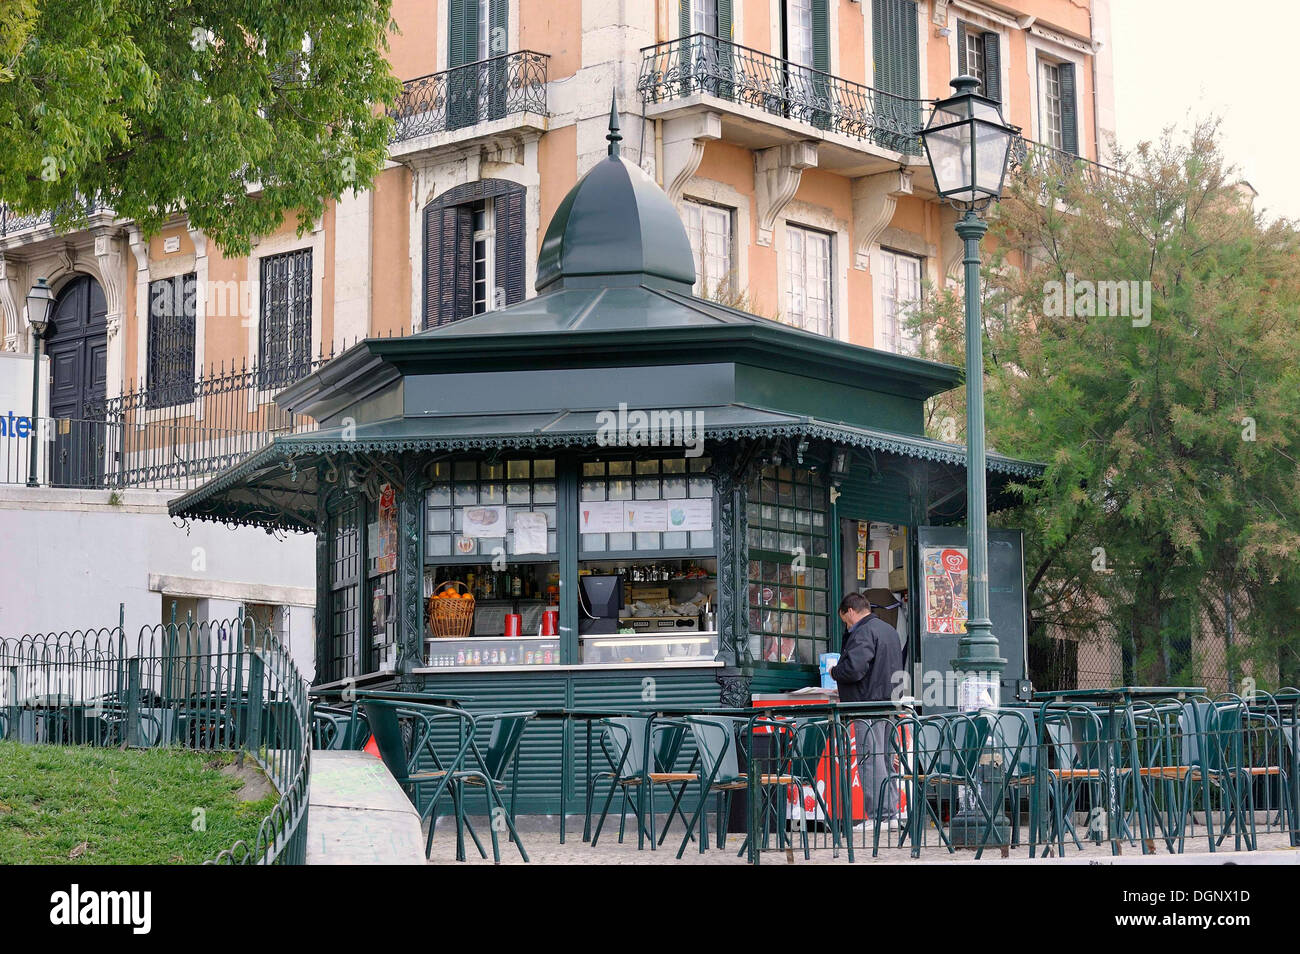 A typical cast iron polygonal kiosk, chairs and tables standing in front of it, Bairro Alto, Lisbon, Portugal, Europe Stock Photo